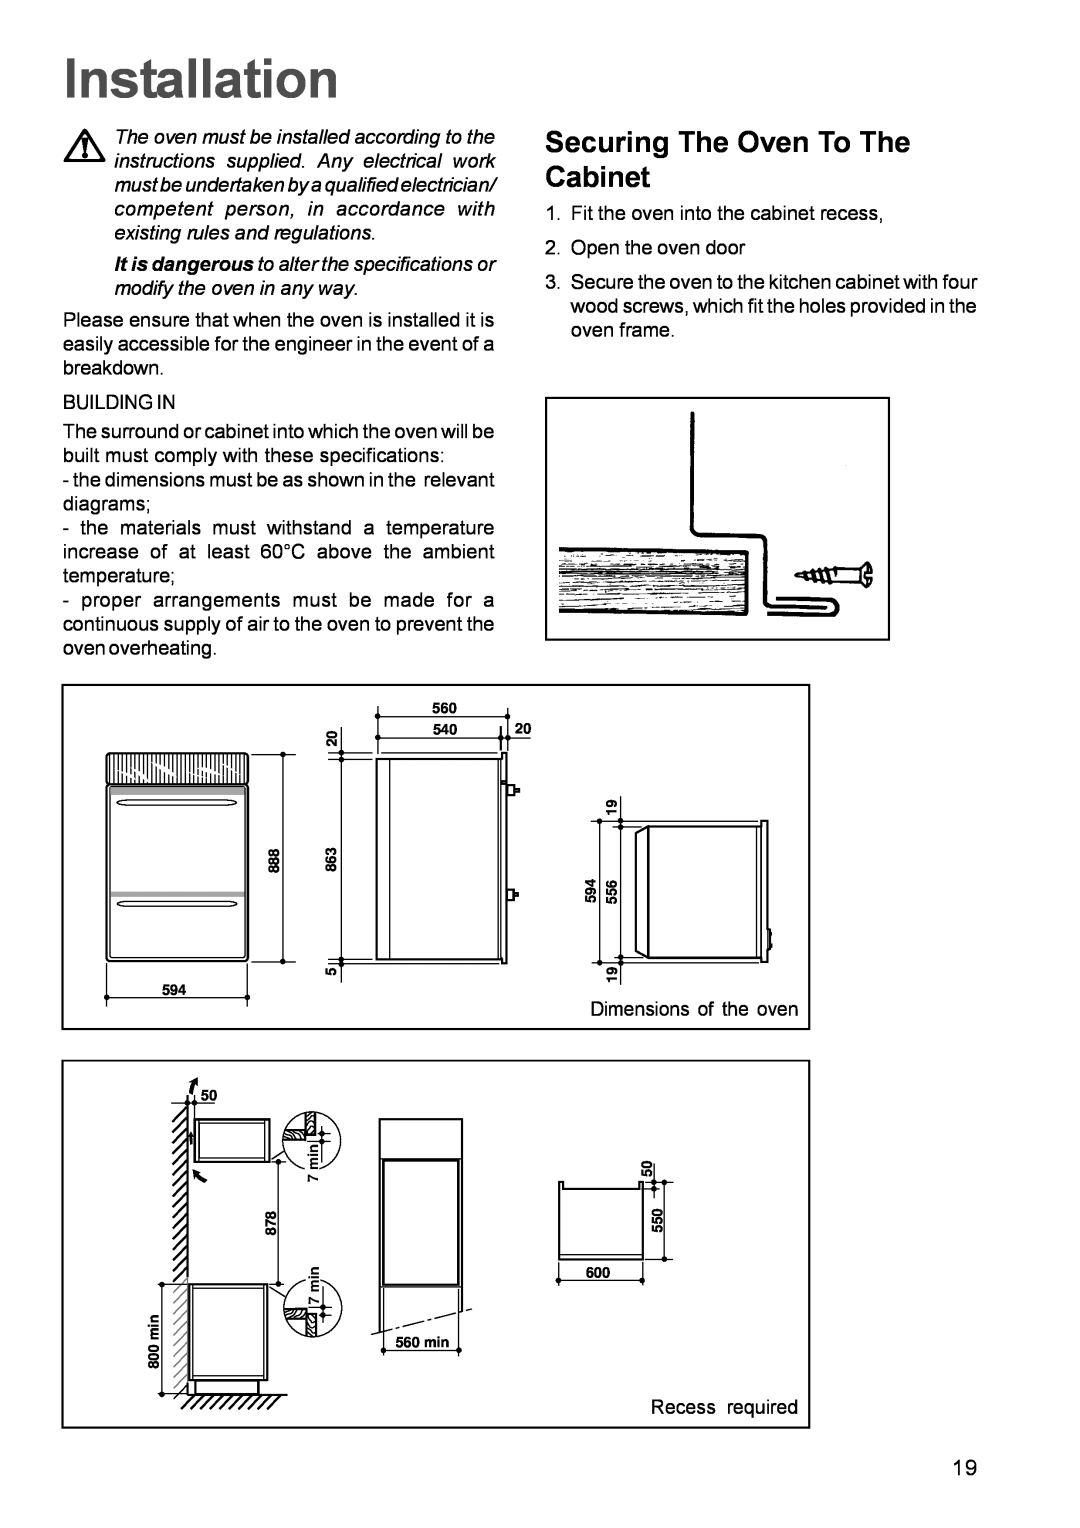 Zanussi ZDC 888 manual Securing The Oven To The Cabinet, Installation, Dimensions of the oven, Recess 